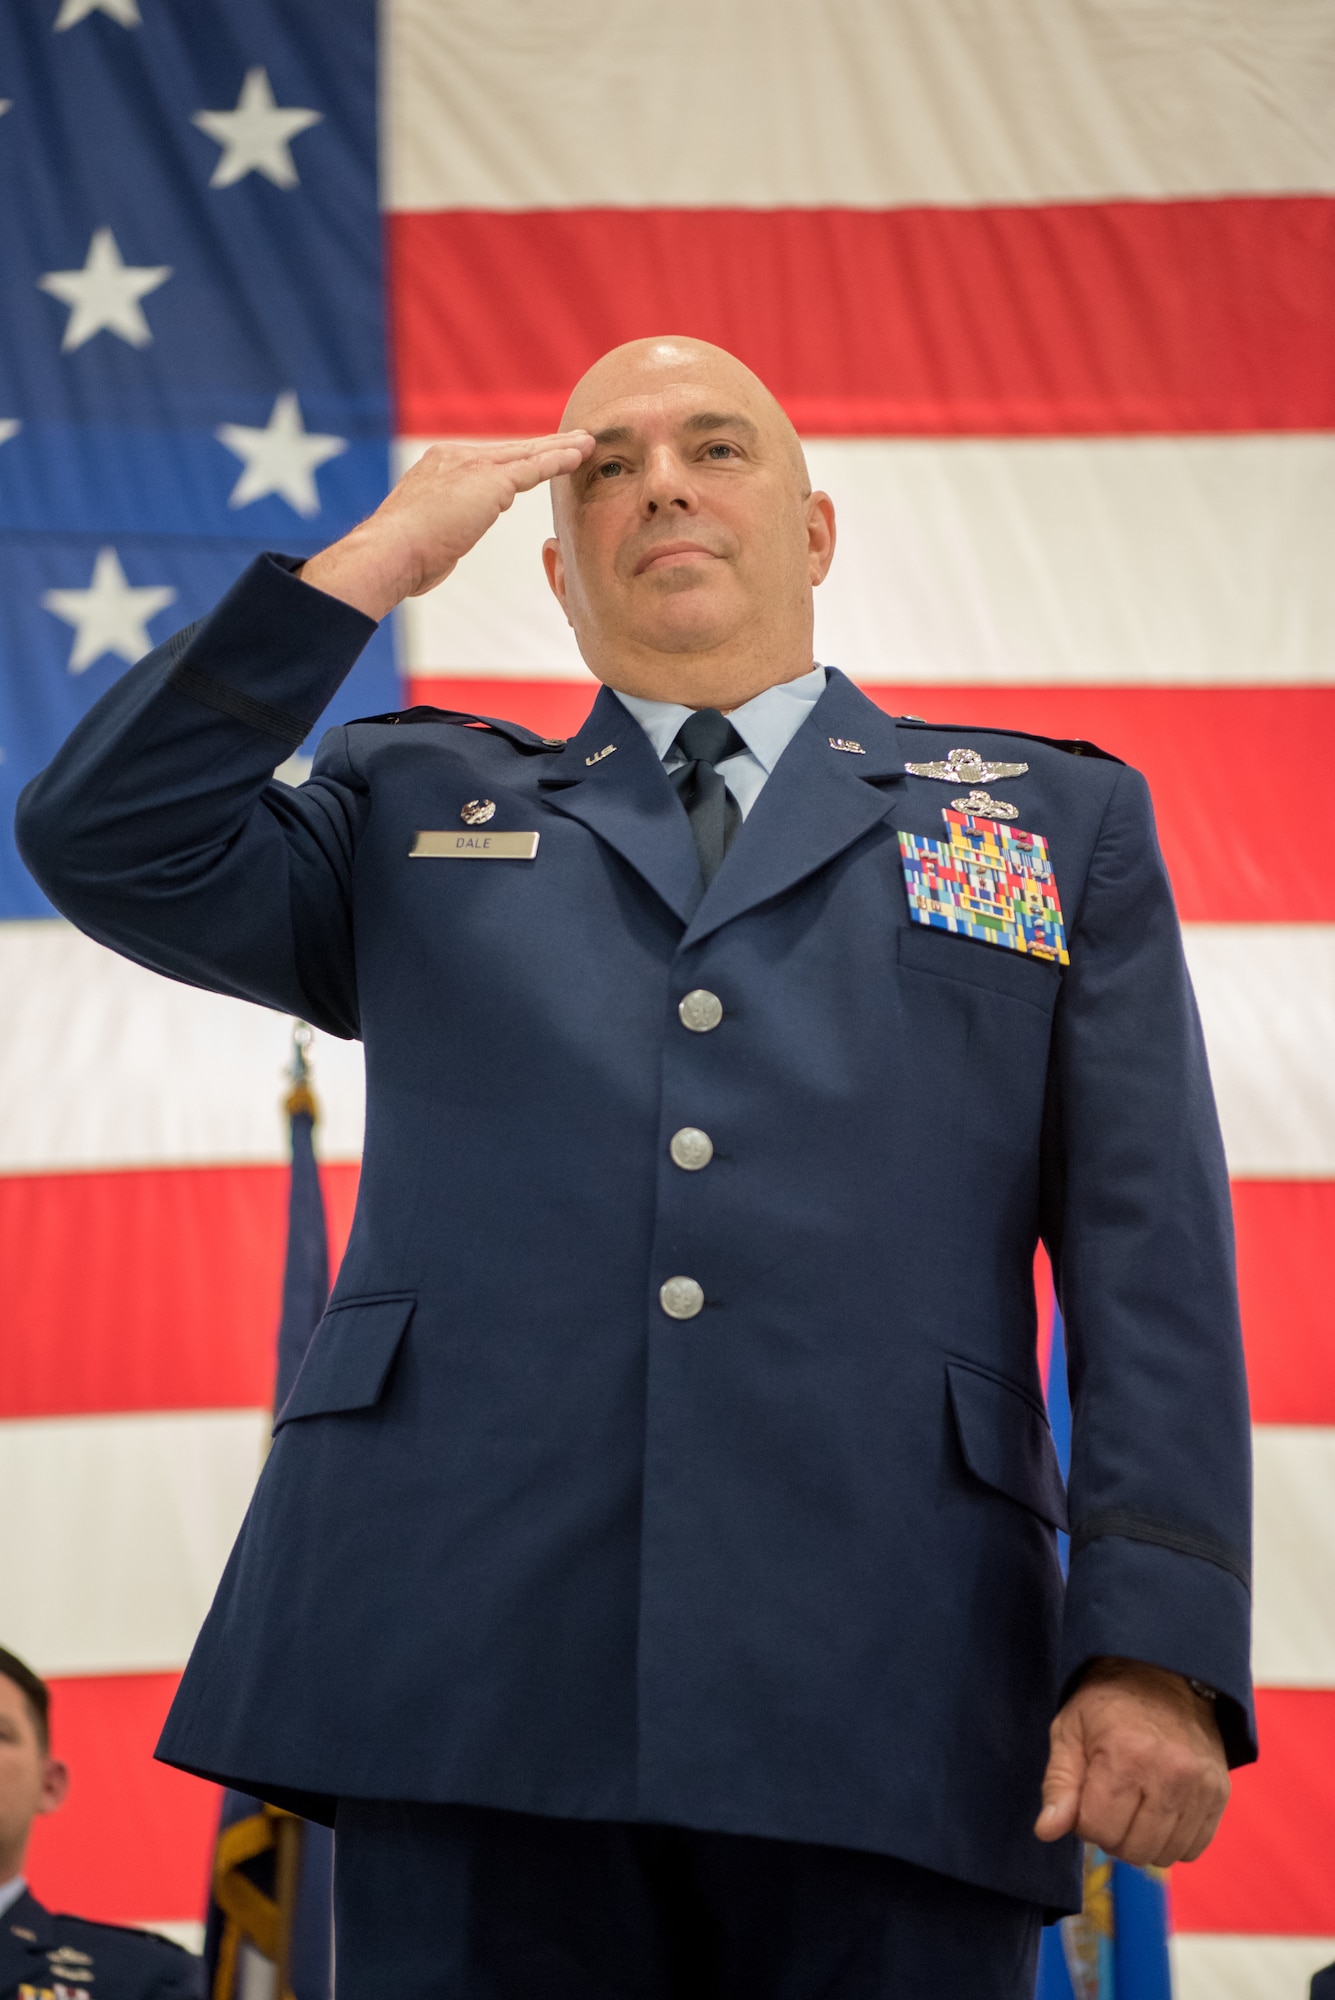 Col. Ken Dale receives his final salute as commander of the 123rd Maintenance Group during a ceremony at the Kentucky Air National Guard Base in Louisville, Ky., on Dec. 1, 2018. Dale is retiring after more than 38 years of service to the Kentucky Air National Guard. (U.S. Air National Guard photo by Staff Sgt. Joshua Horton)